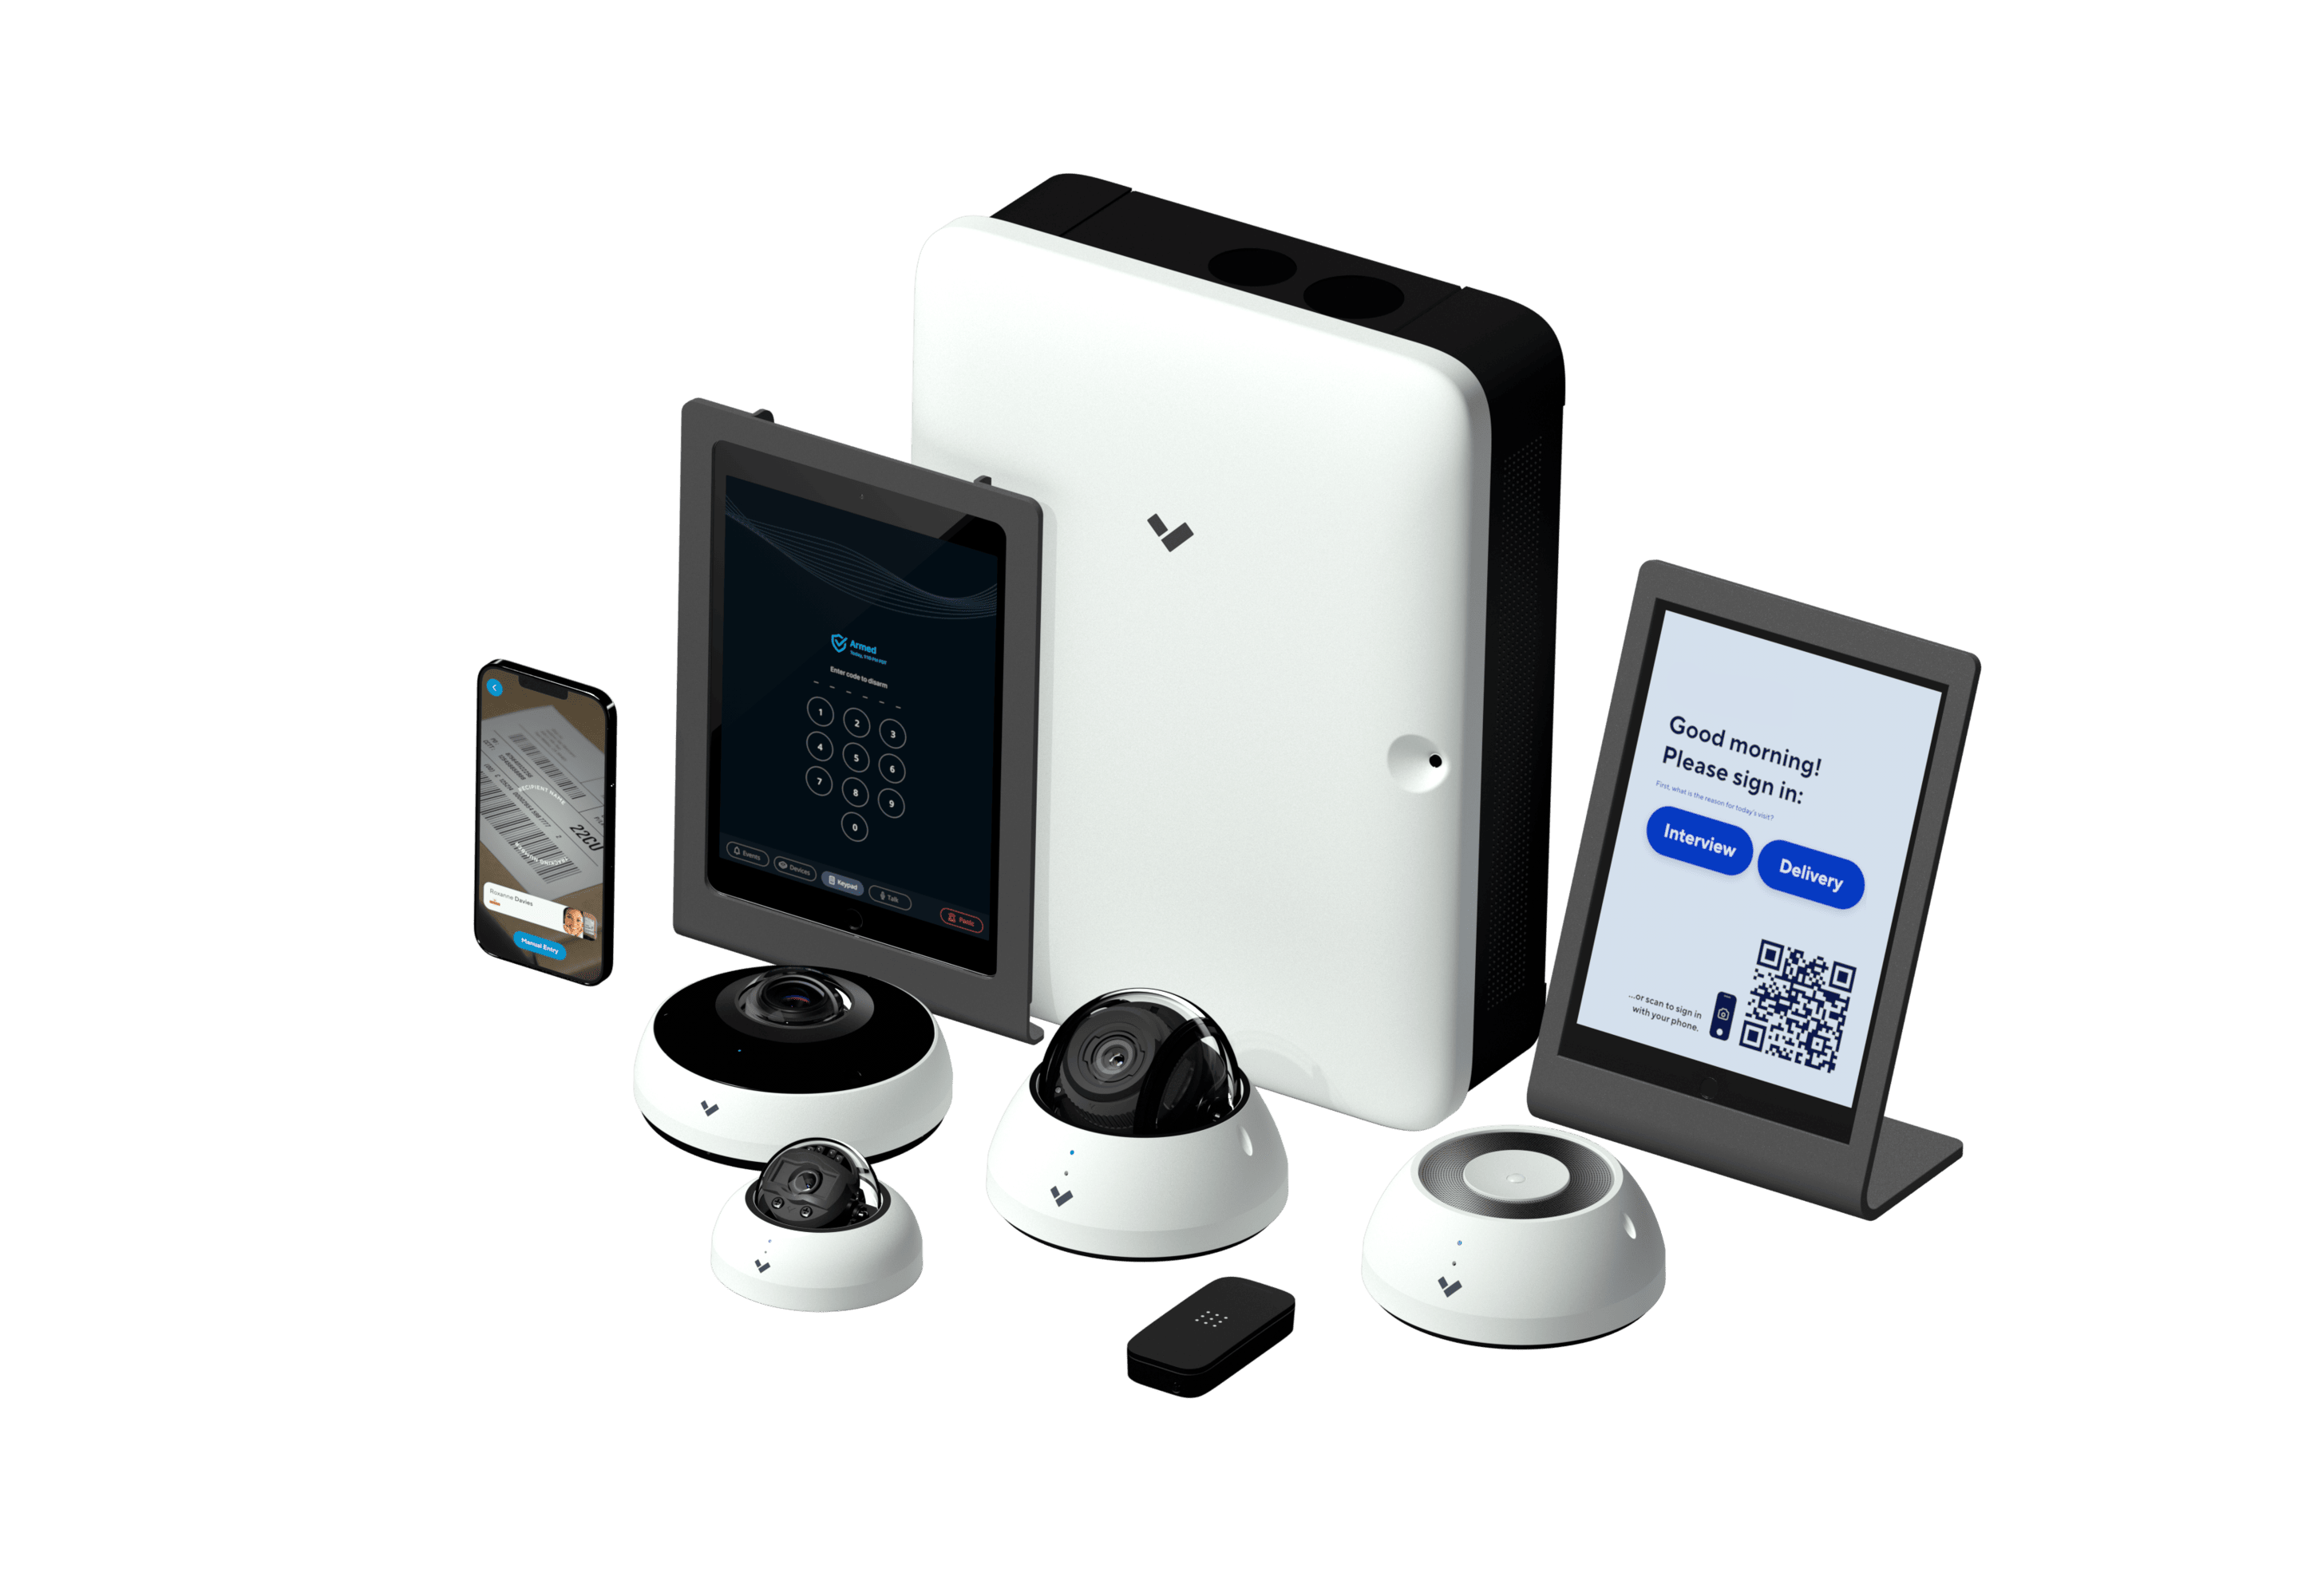 Verkada Device Family enhances loss prevention efforts with cloud based access control